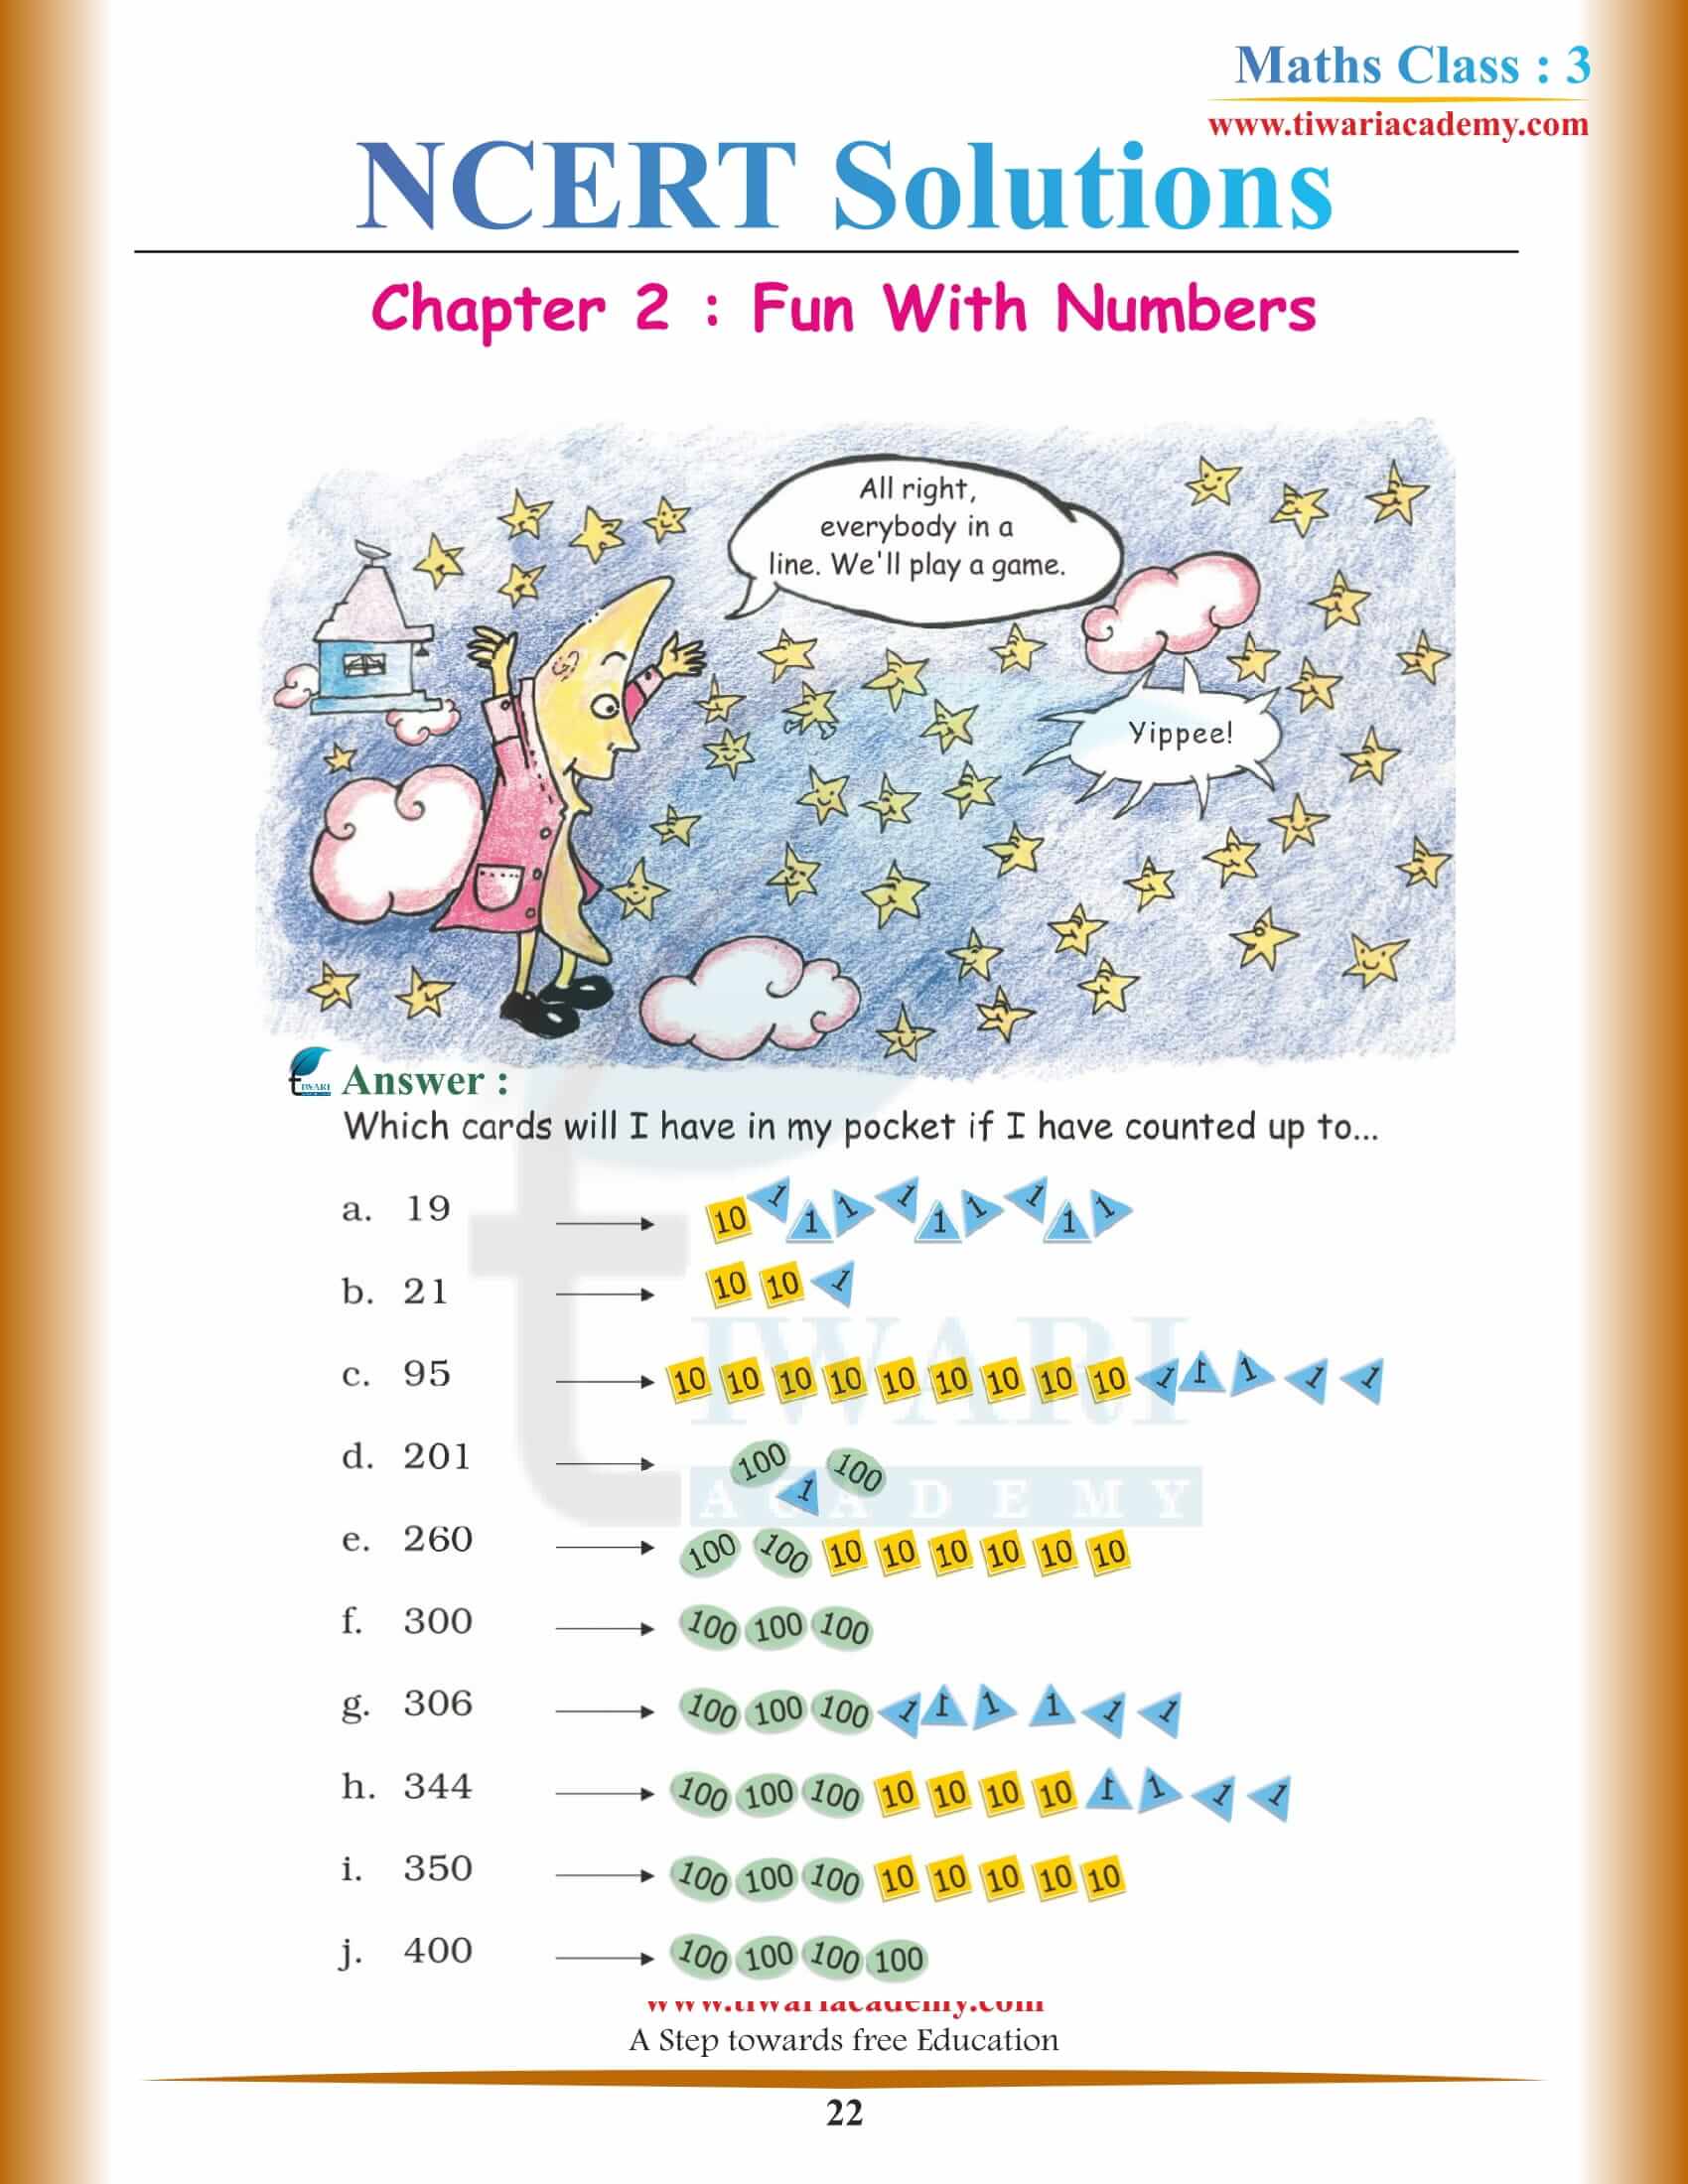 Grade 3 Maths Chapter 2 free images